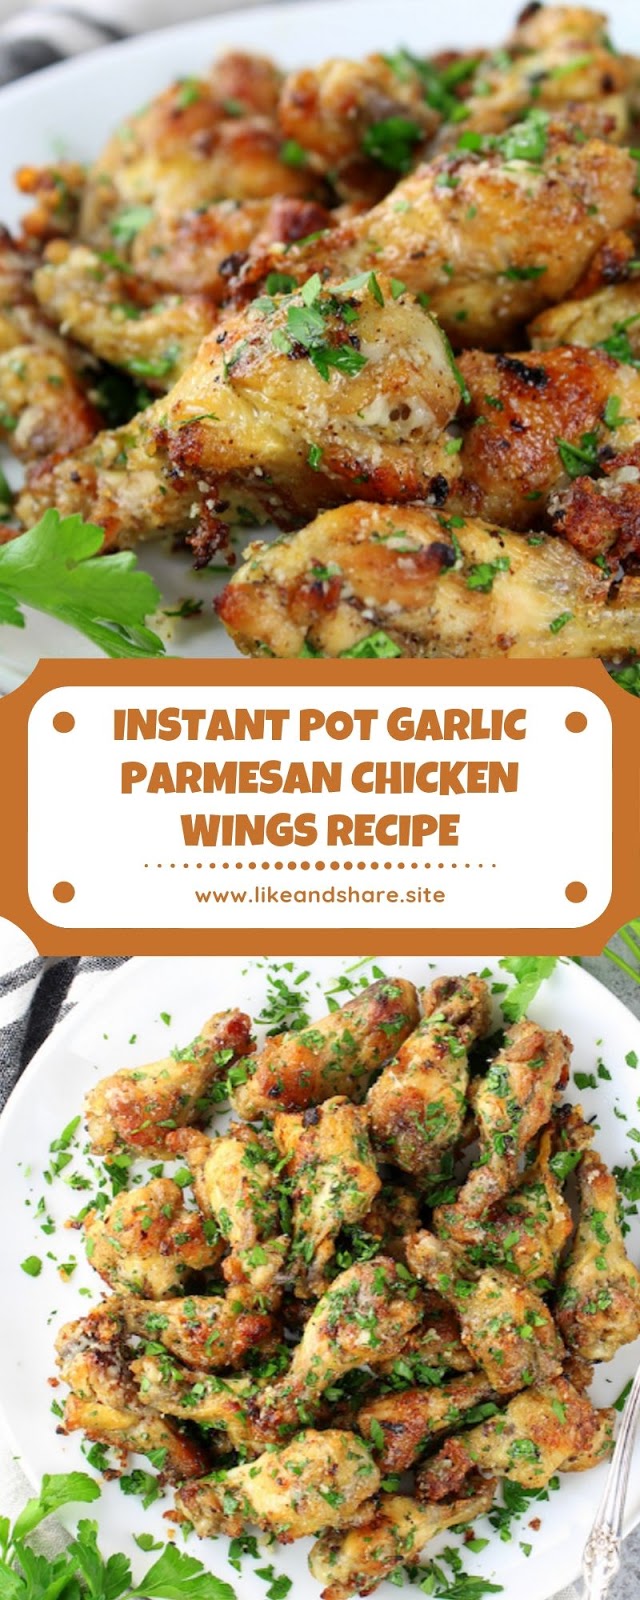 INSTANT POT GARLIC PARMESAN CHICKEN WINGS RECIPE - Like and Share